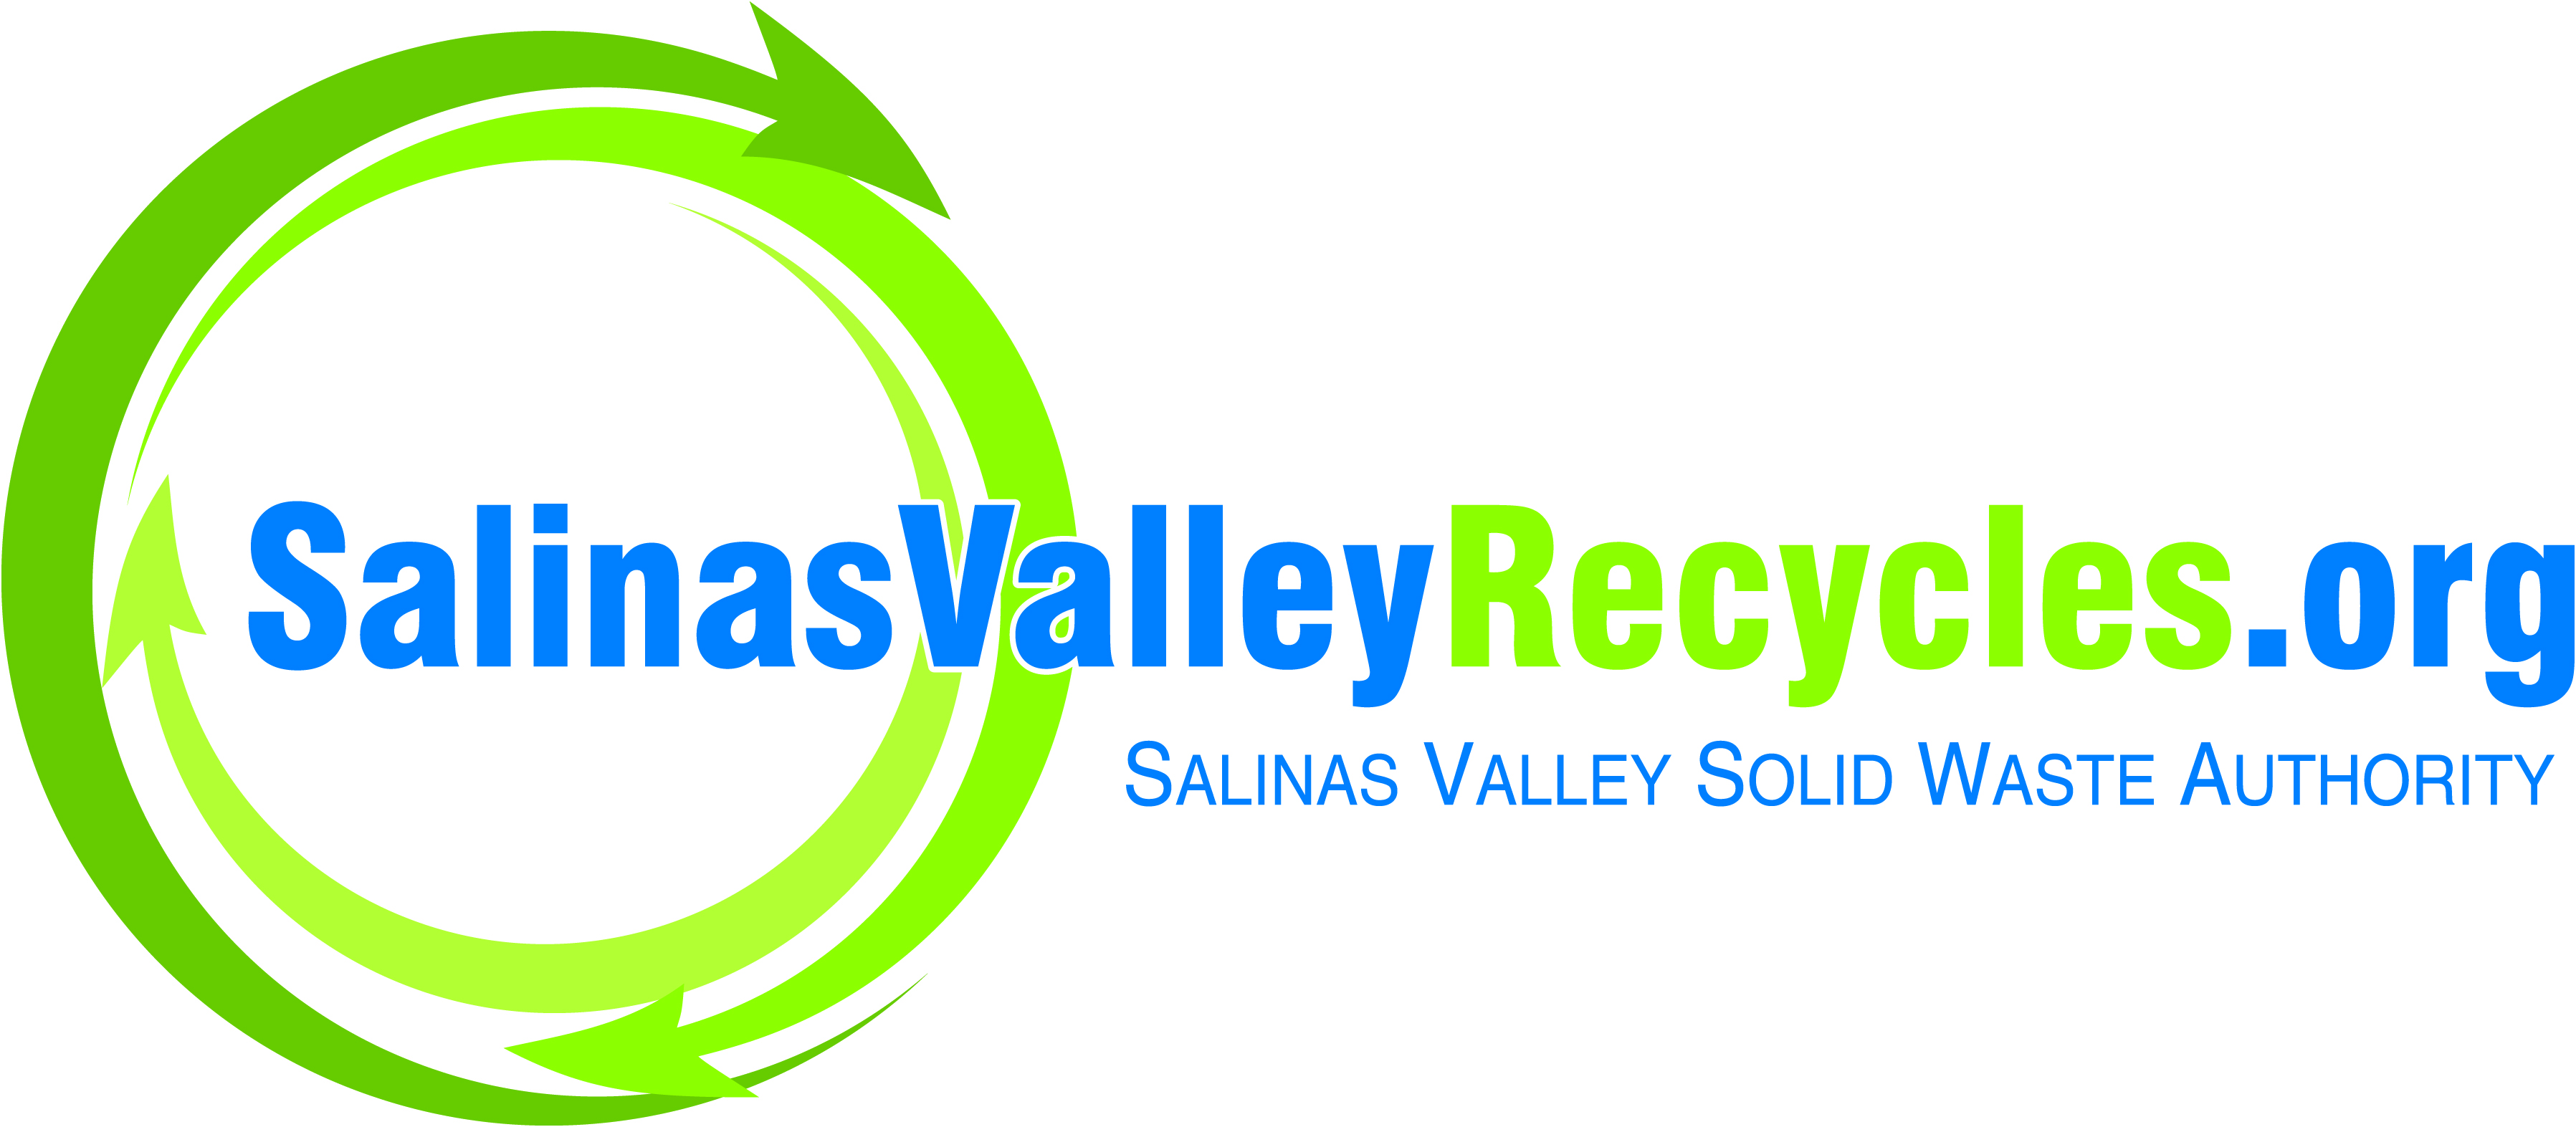 JRMA Awarded Multi-Project Design and Engineering Services Contract with the Salinas  Valley Solid Waste Authority for Landfill Facility Improvements